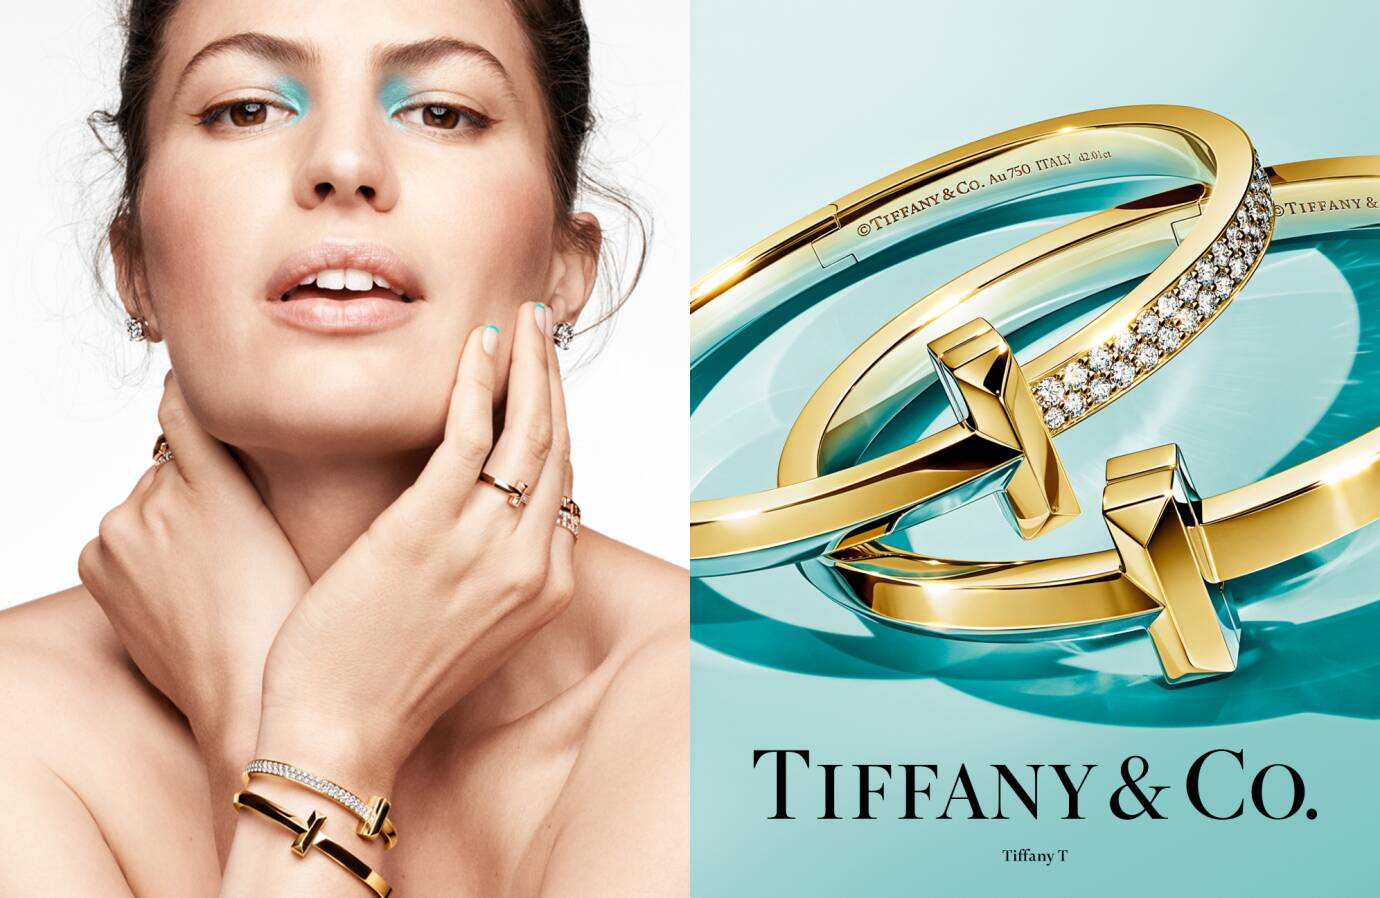 LVMH to buy French jewellery producer Platinum Invest to ramp up Tiffany  production